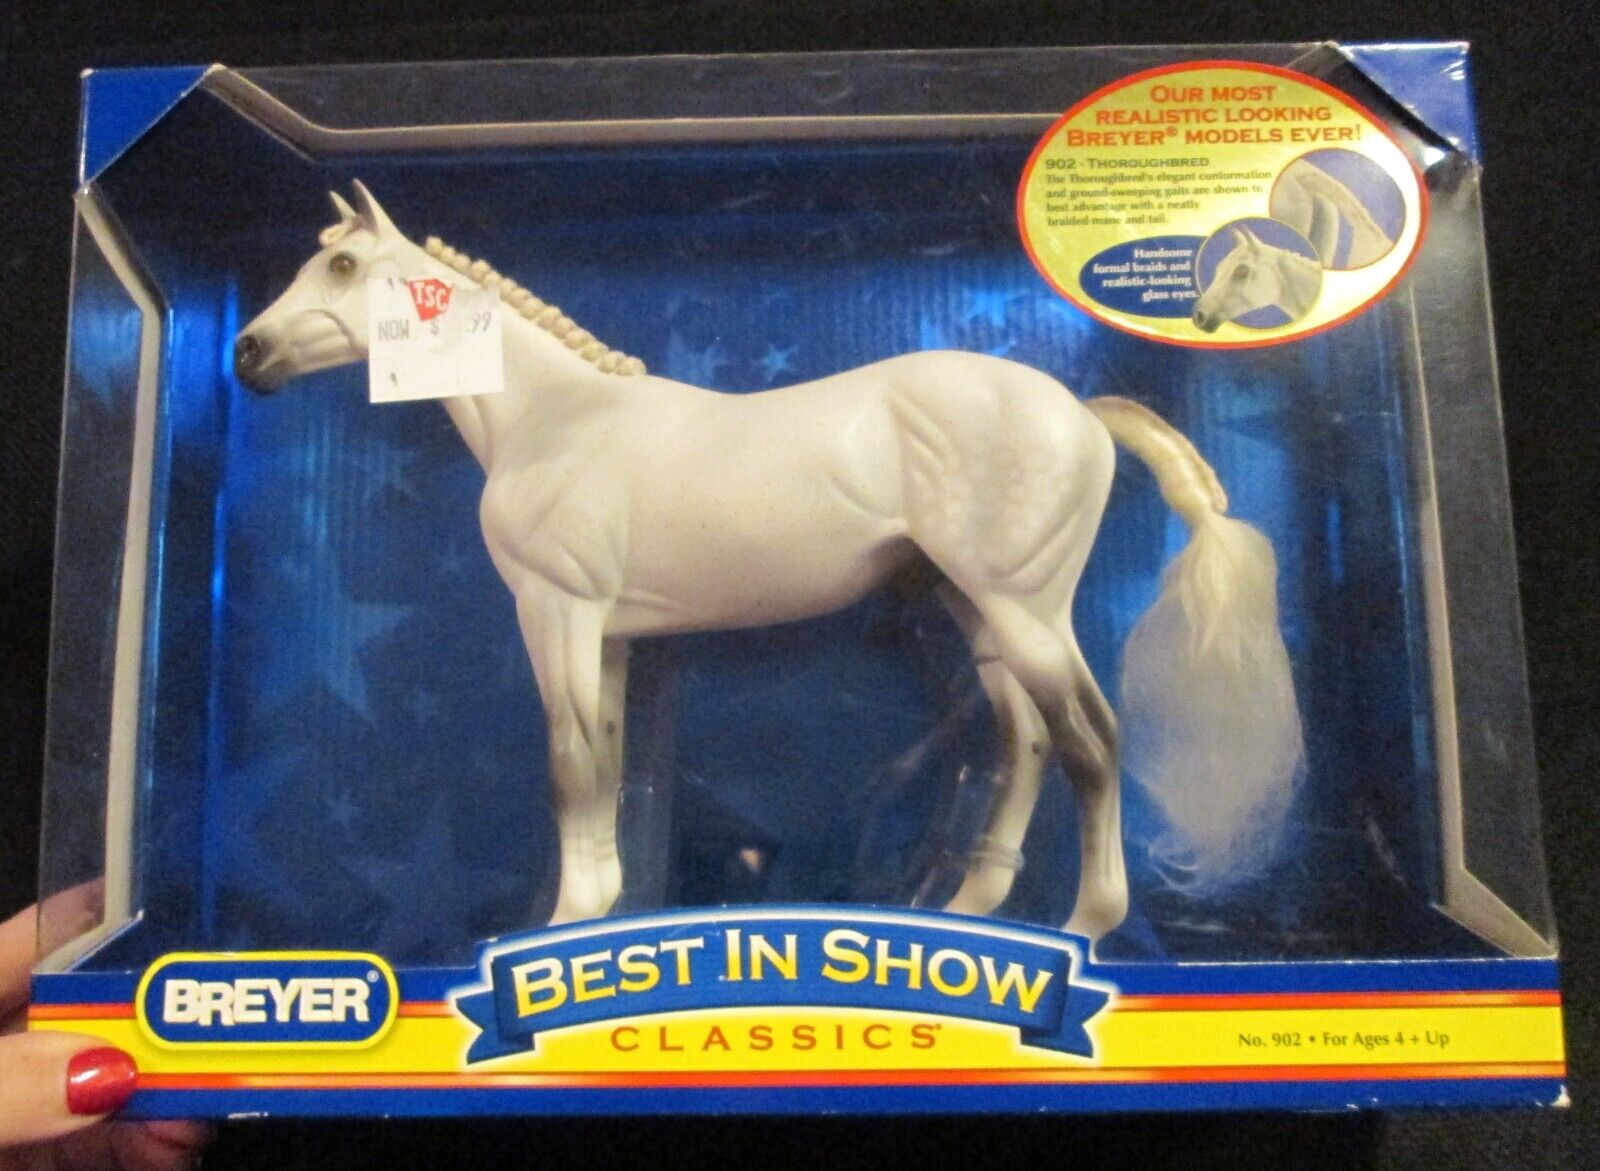 NEW BREYER BEST IN SHOW CLASSICS 902 THOROUGHBRED HORSE 2009 SEALED